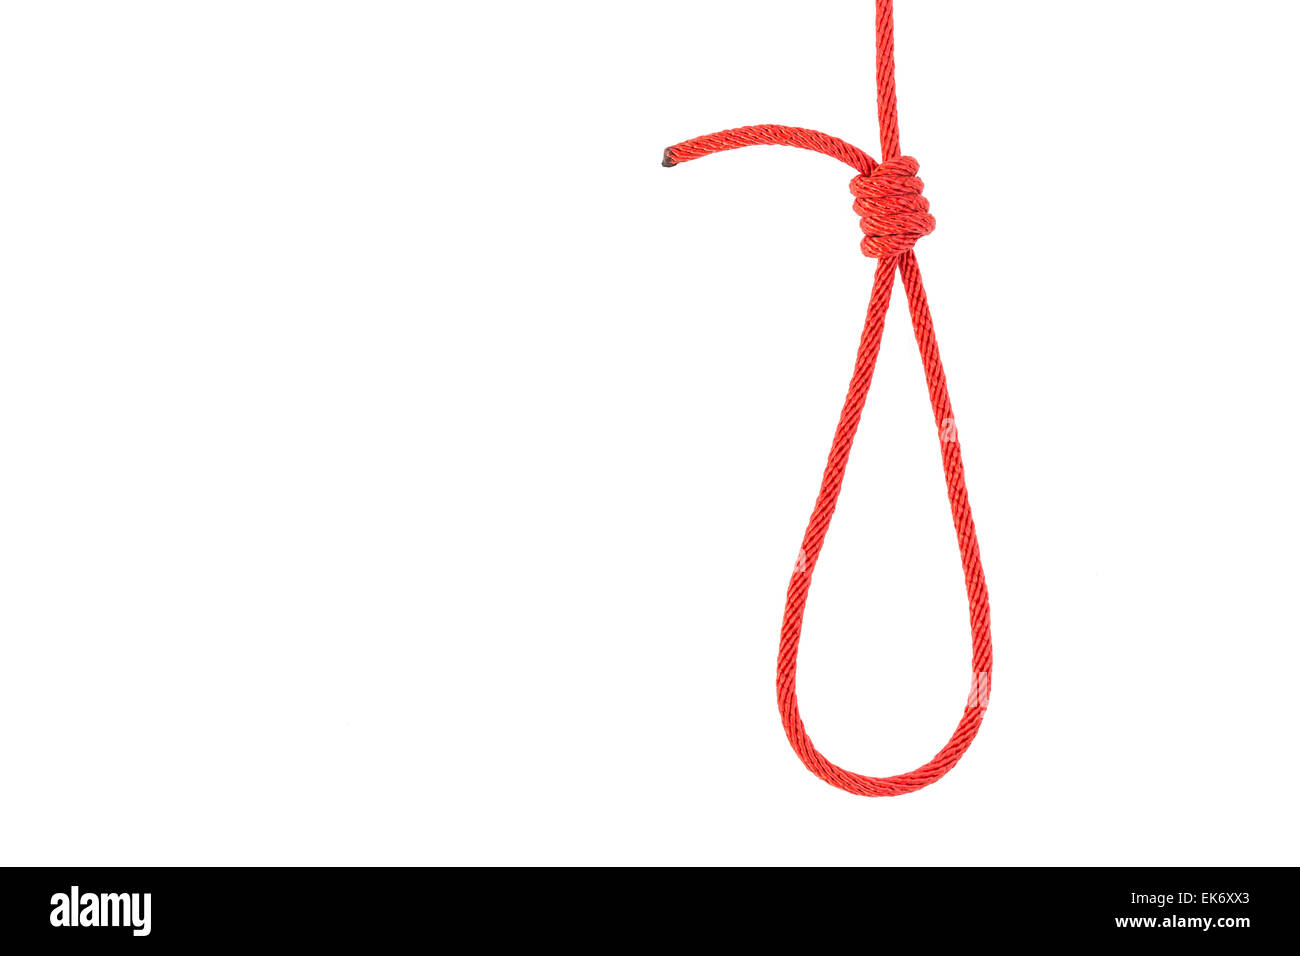 noose with gallows knot tied on thick jute rope isolated on white